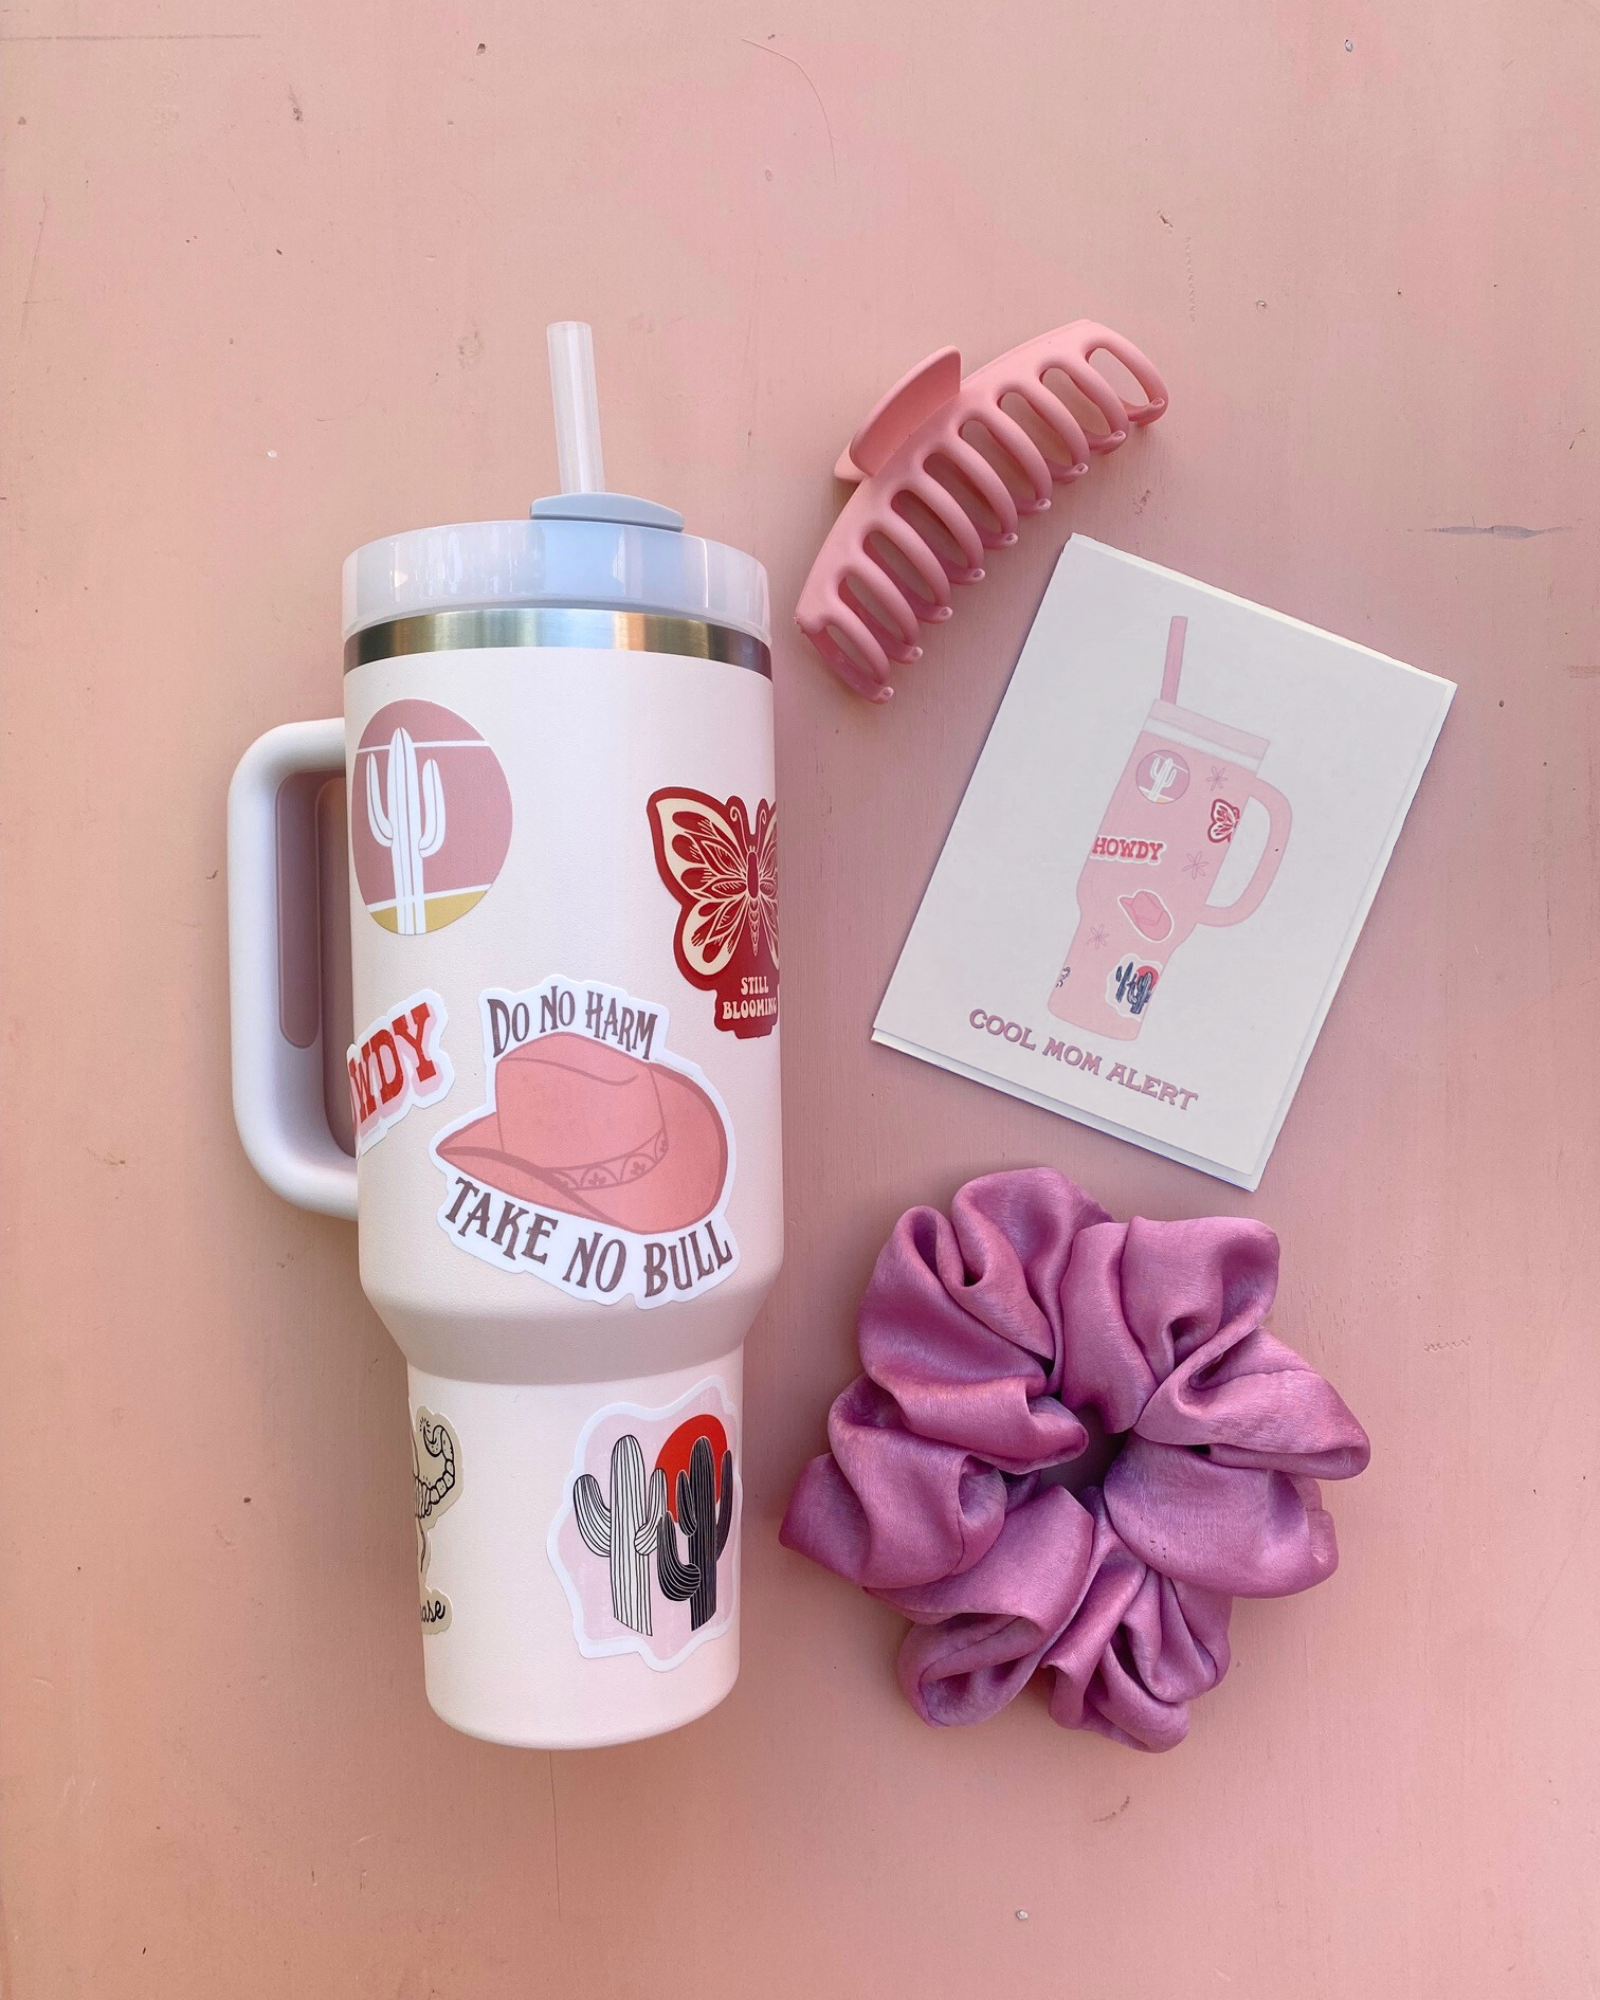 Flatlay photo of greeting card, stanley cup with stickers that is similar to illustrations on card, scrunchie, and hair clip